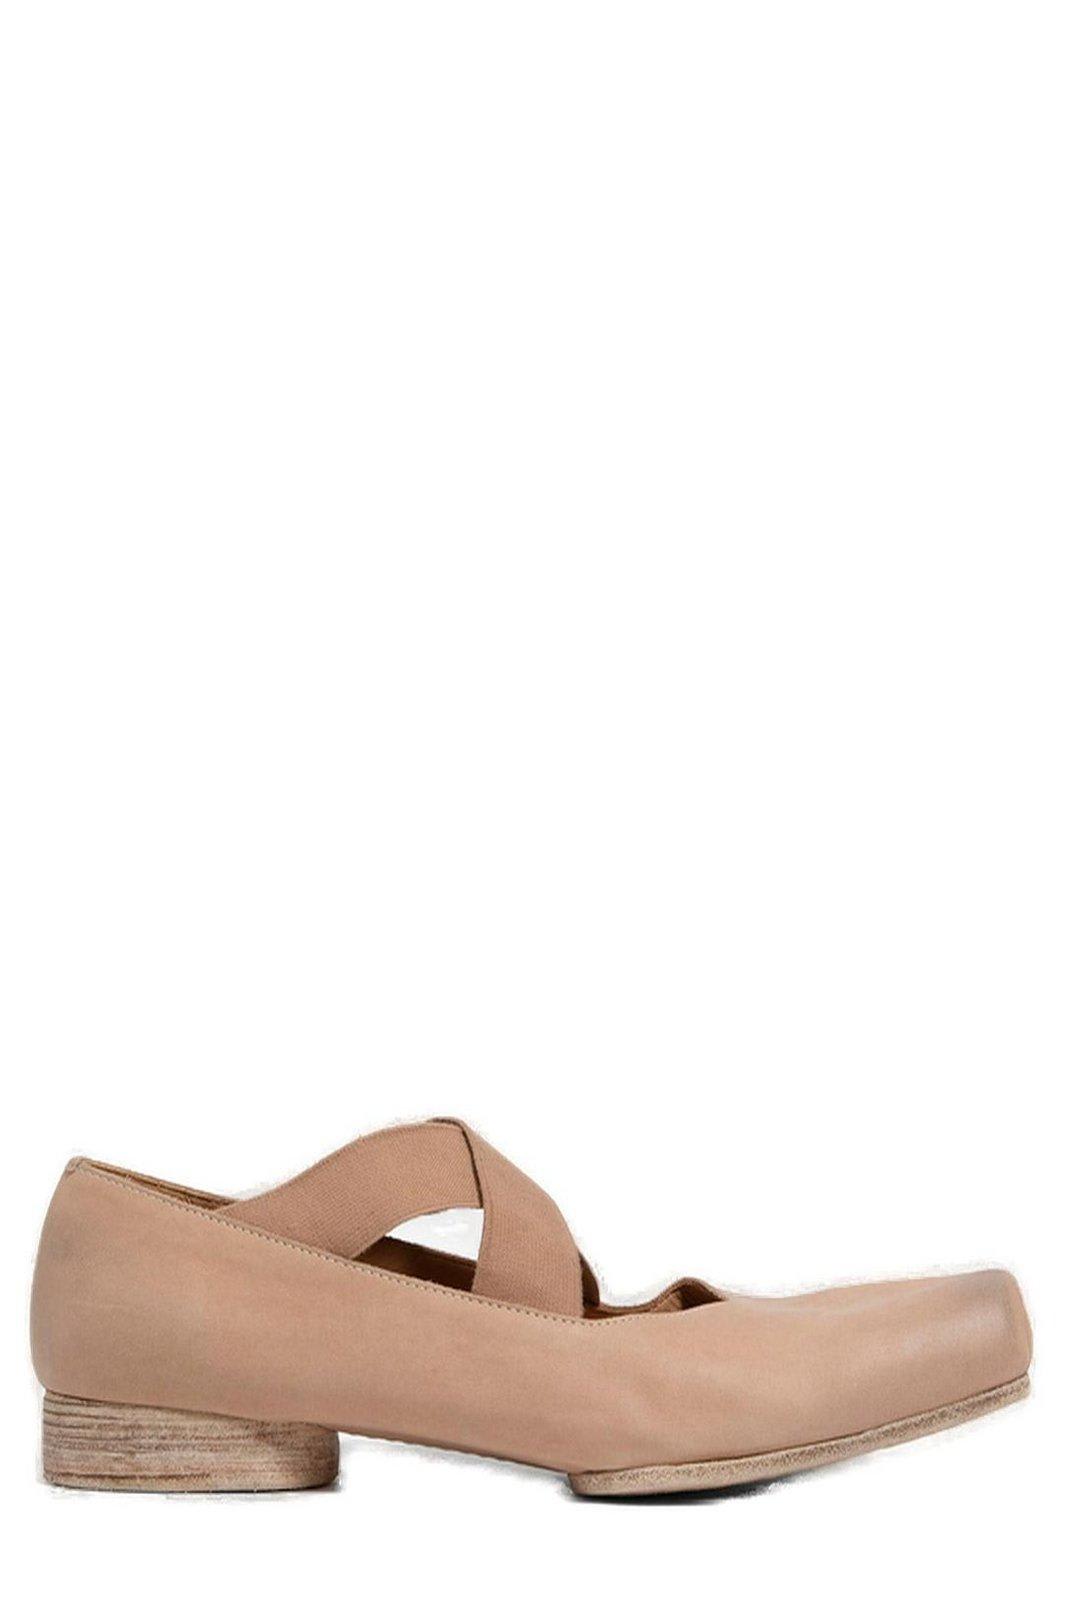 Cross-strapped Ballet Shoes